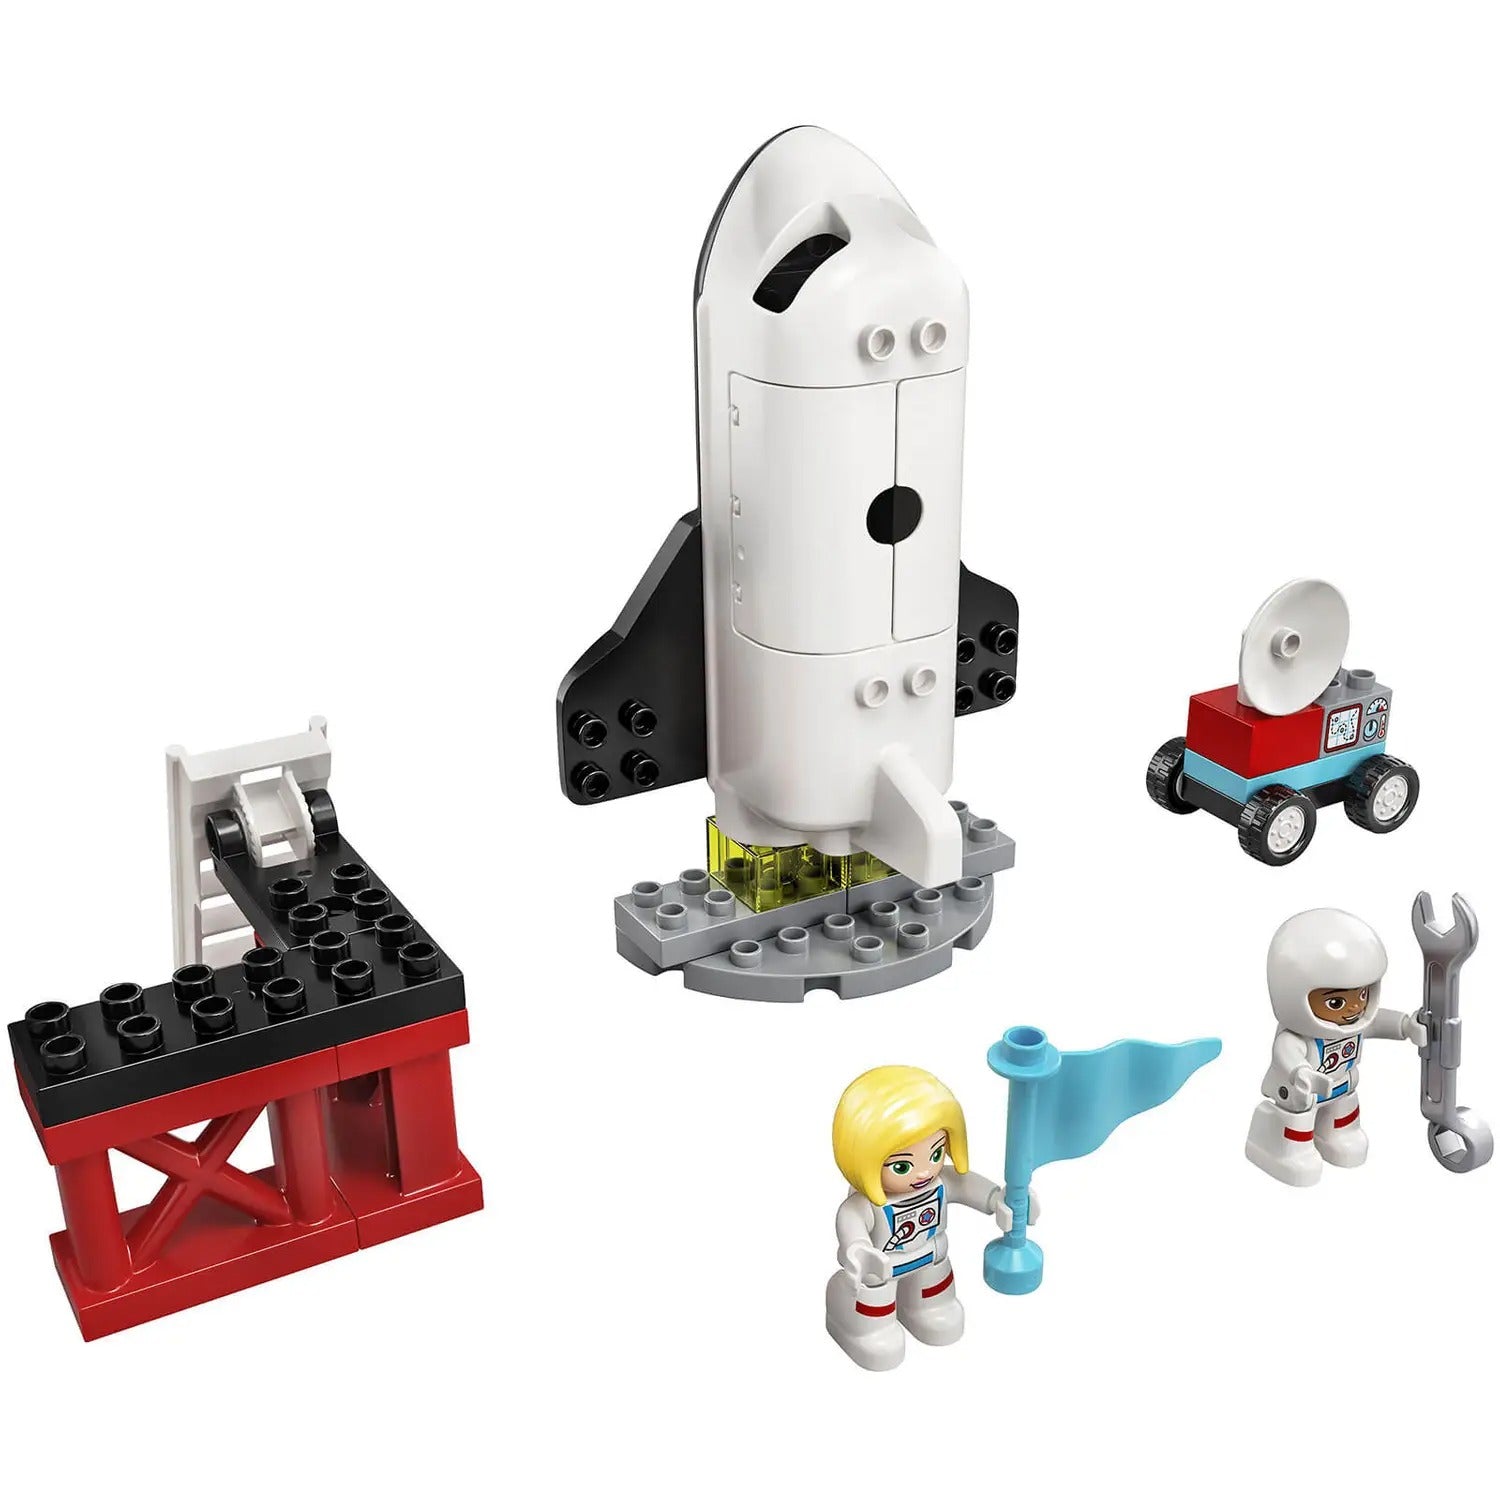 LEGO 10944 DUPLO SPACE SHUTTLE MISSION